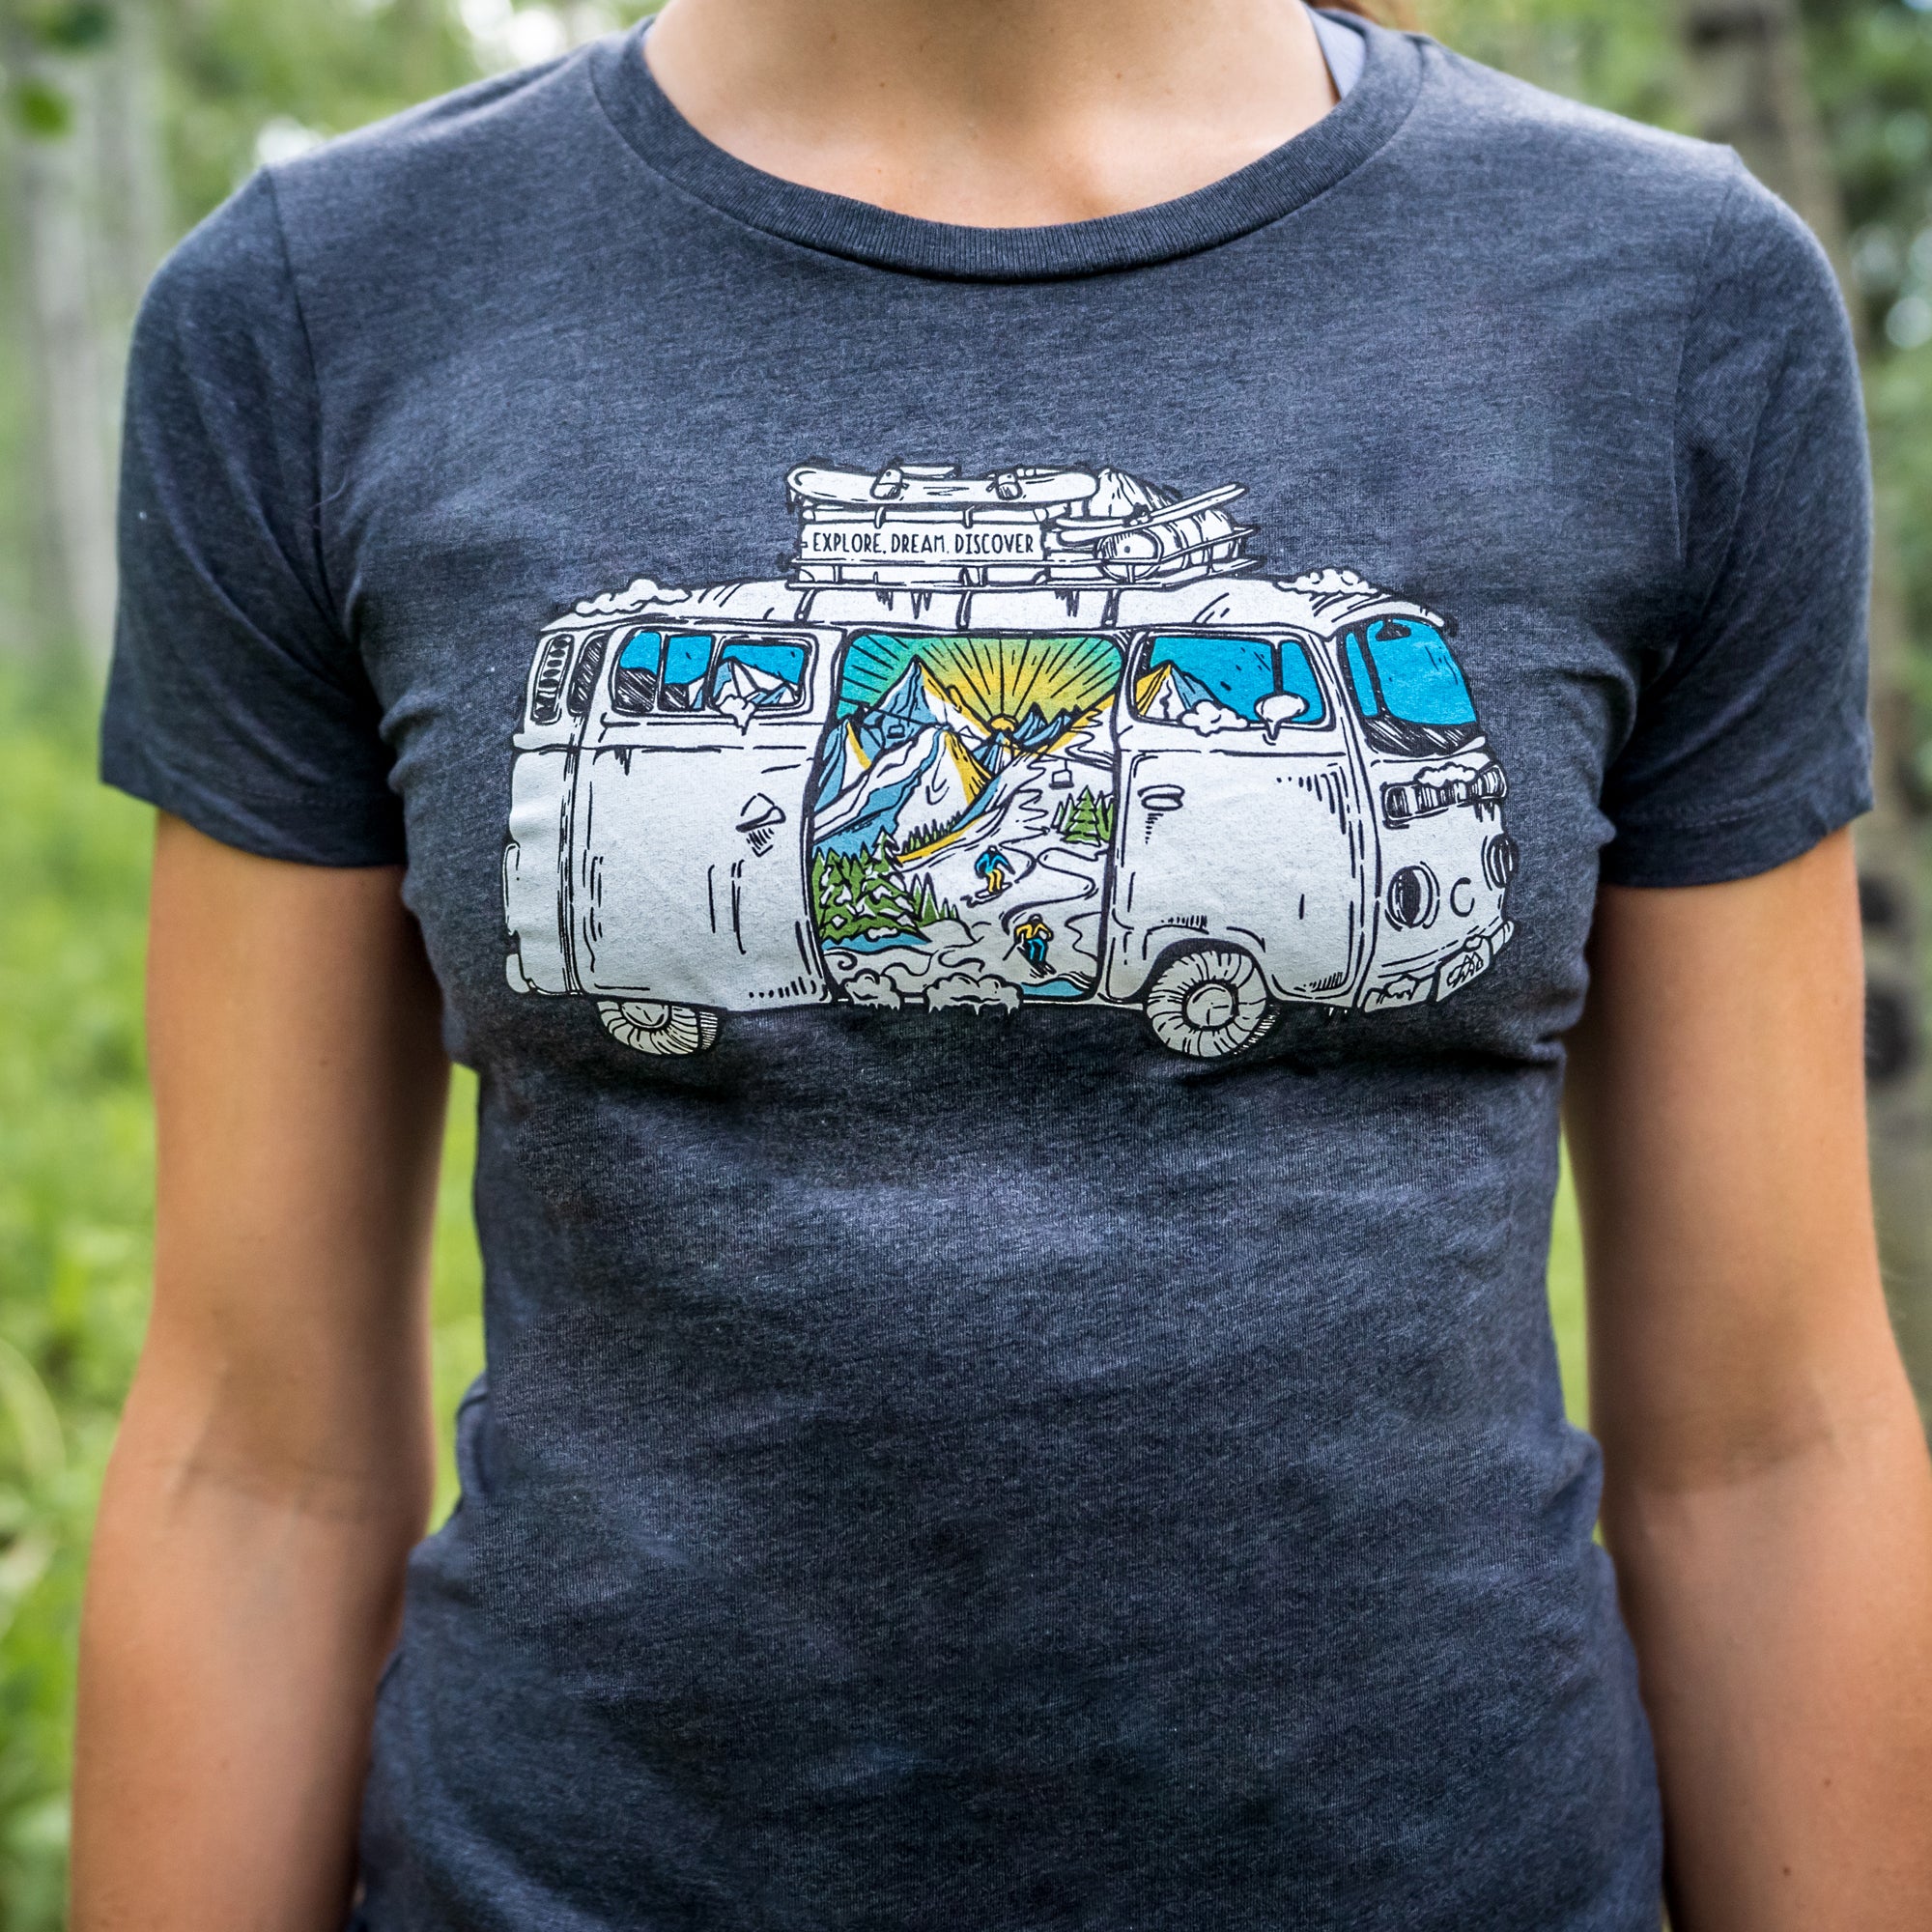 Women's Ski Road Trip Poly/Cotton Fitted T-Shirt